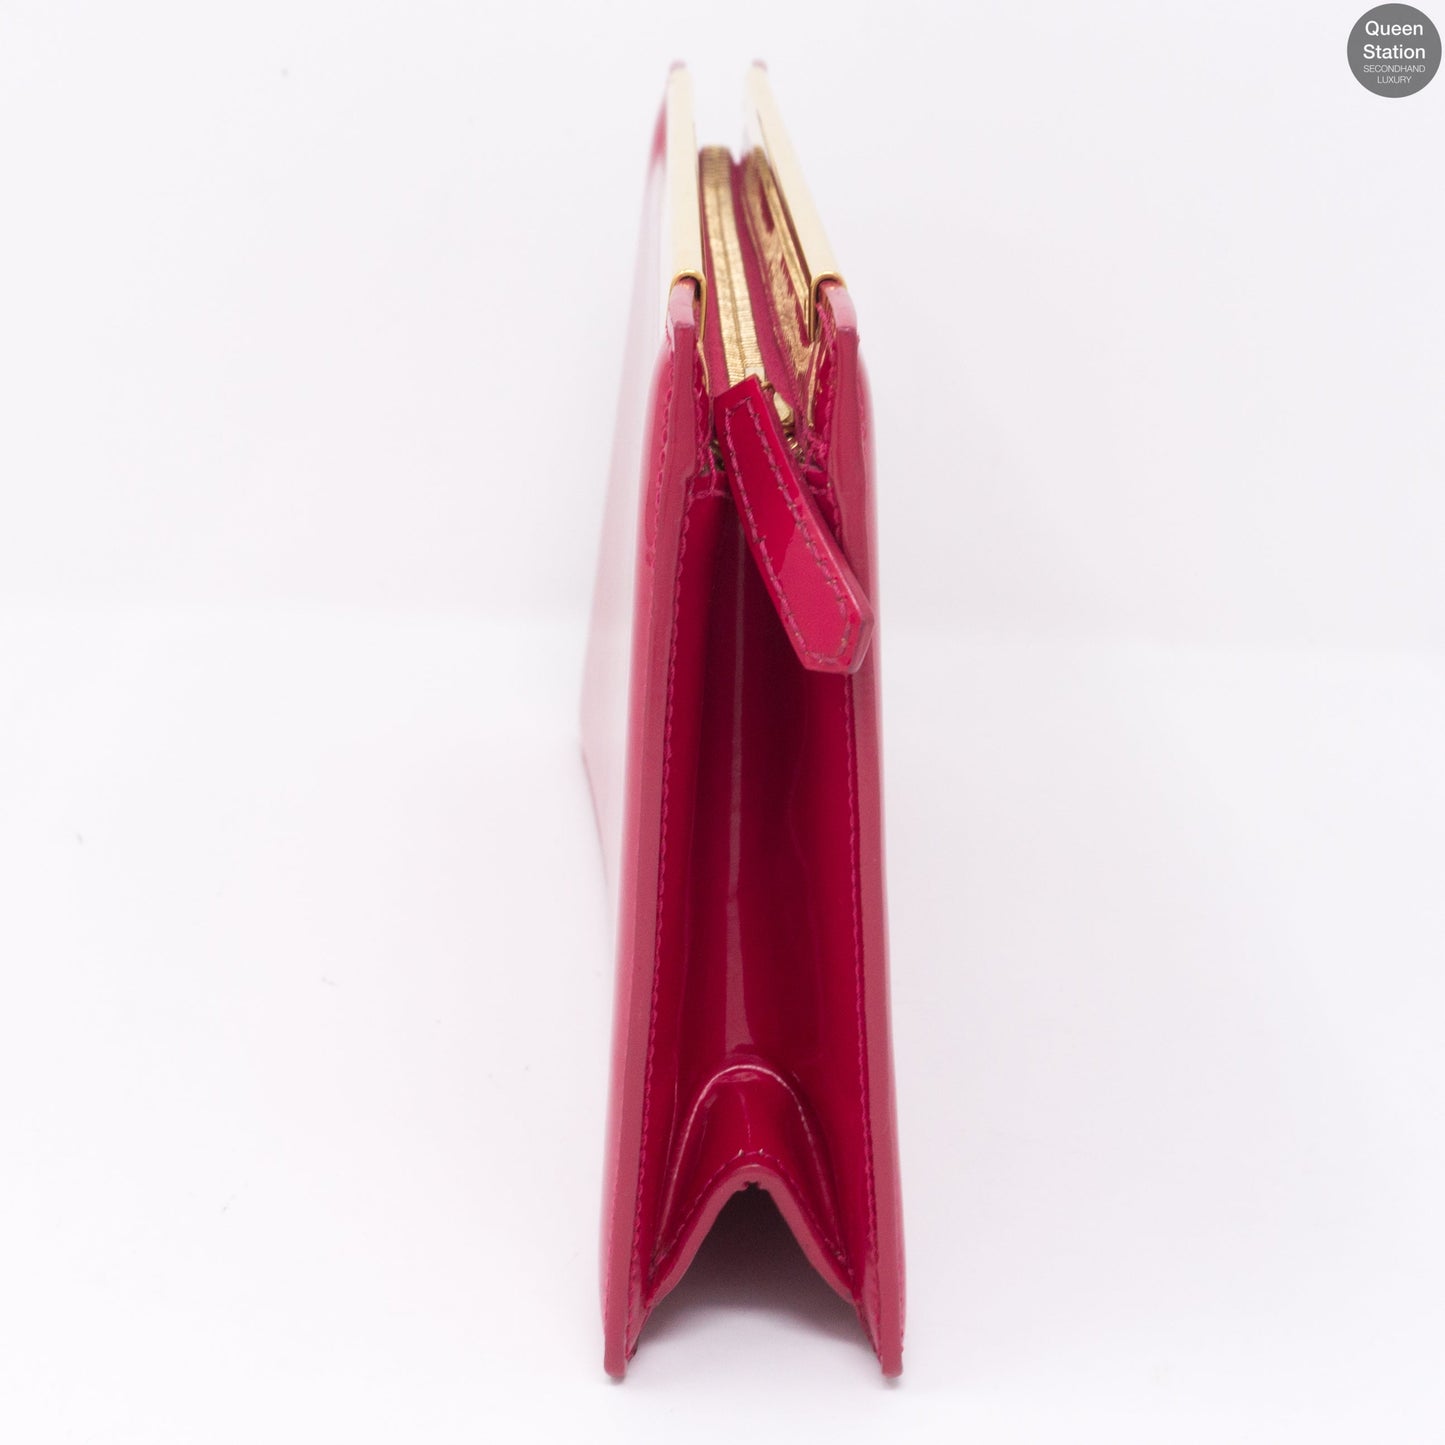 Lutetia Clutch Patent Leather Pink